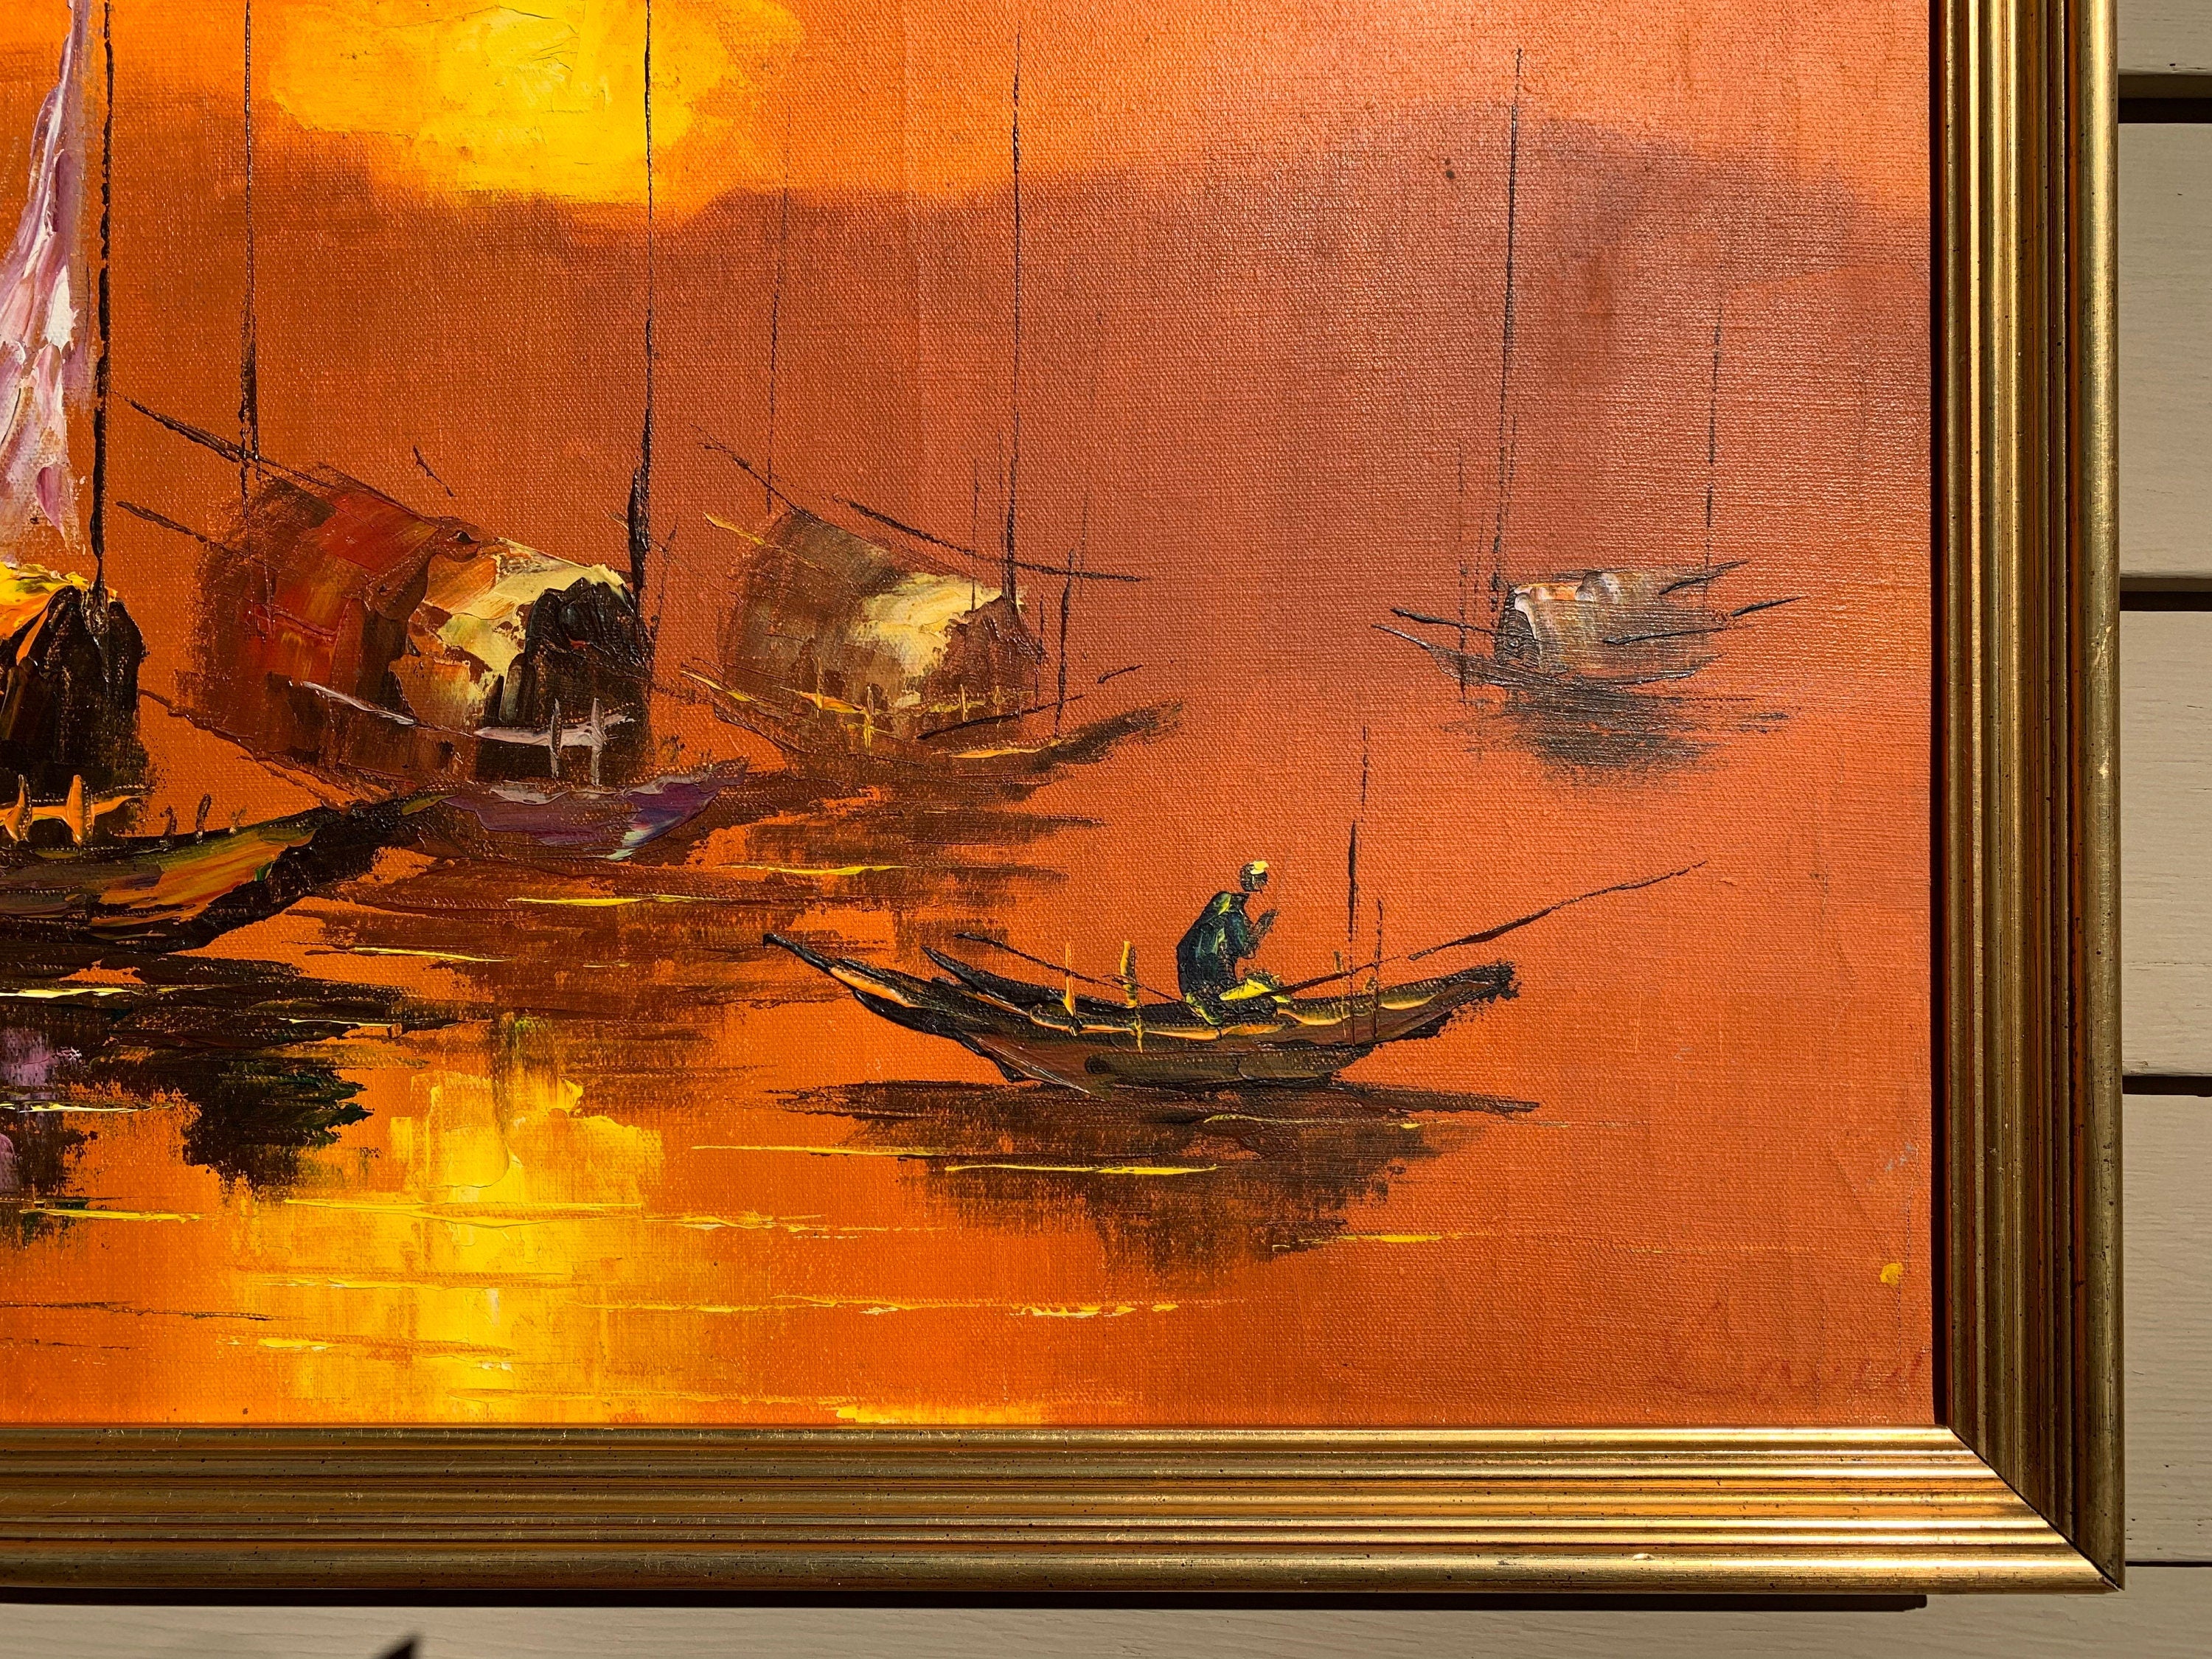 Stunning Oil painting on Canvas, Seascape, Boats at Sunset, Signed